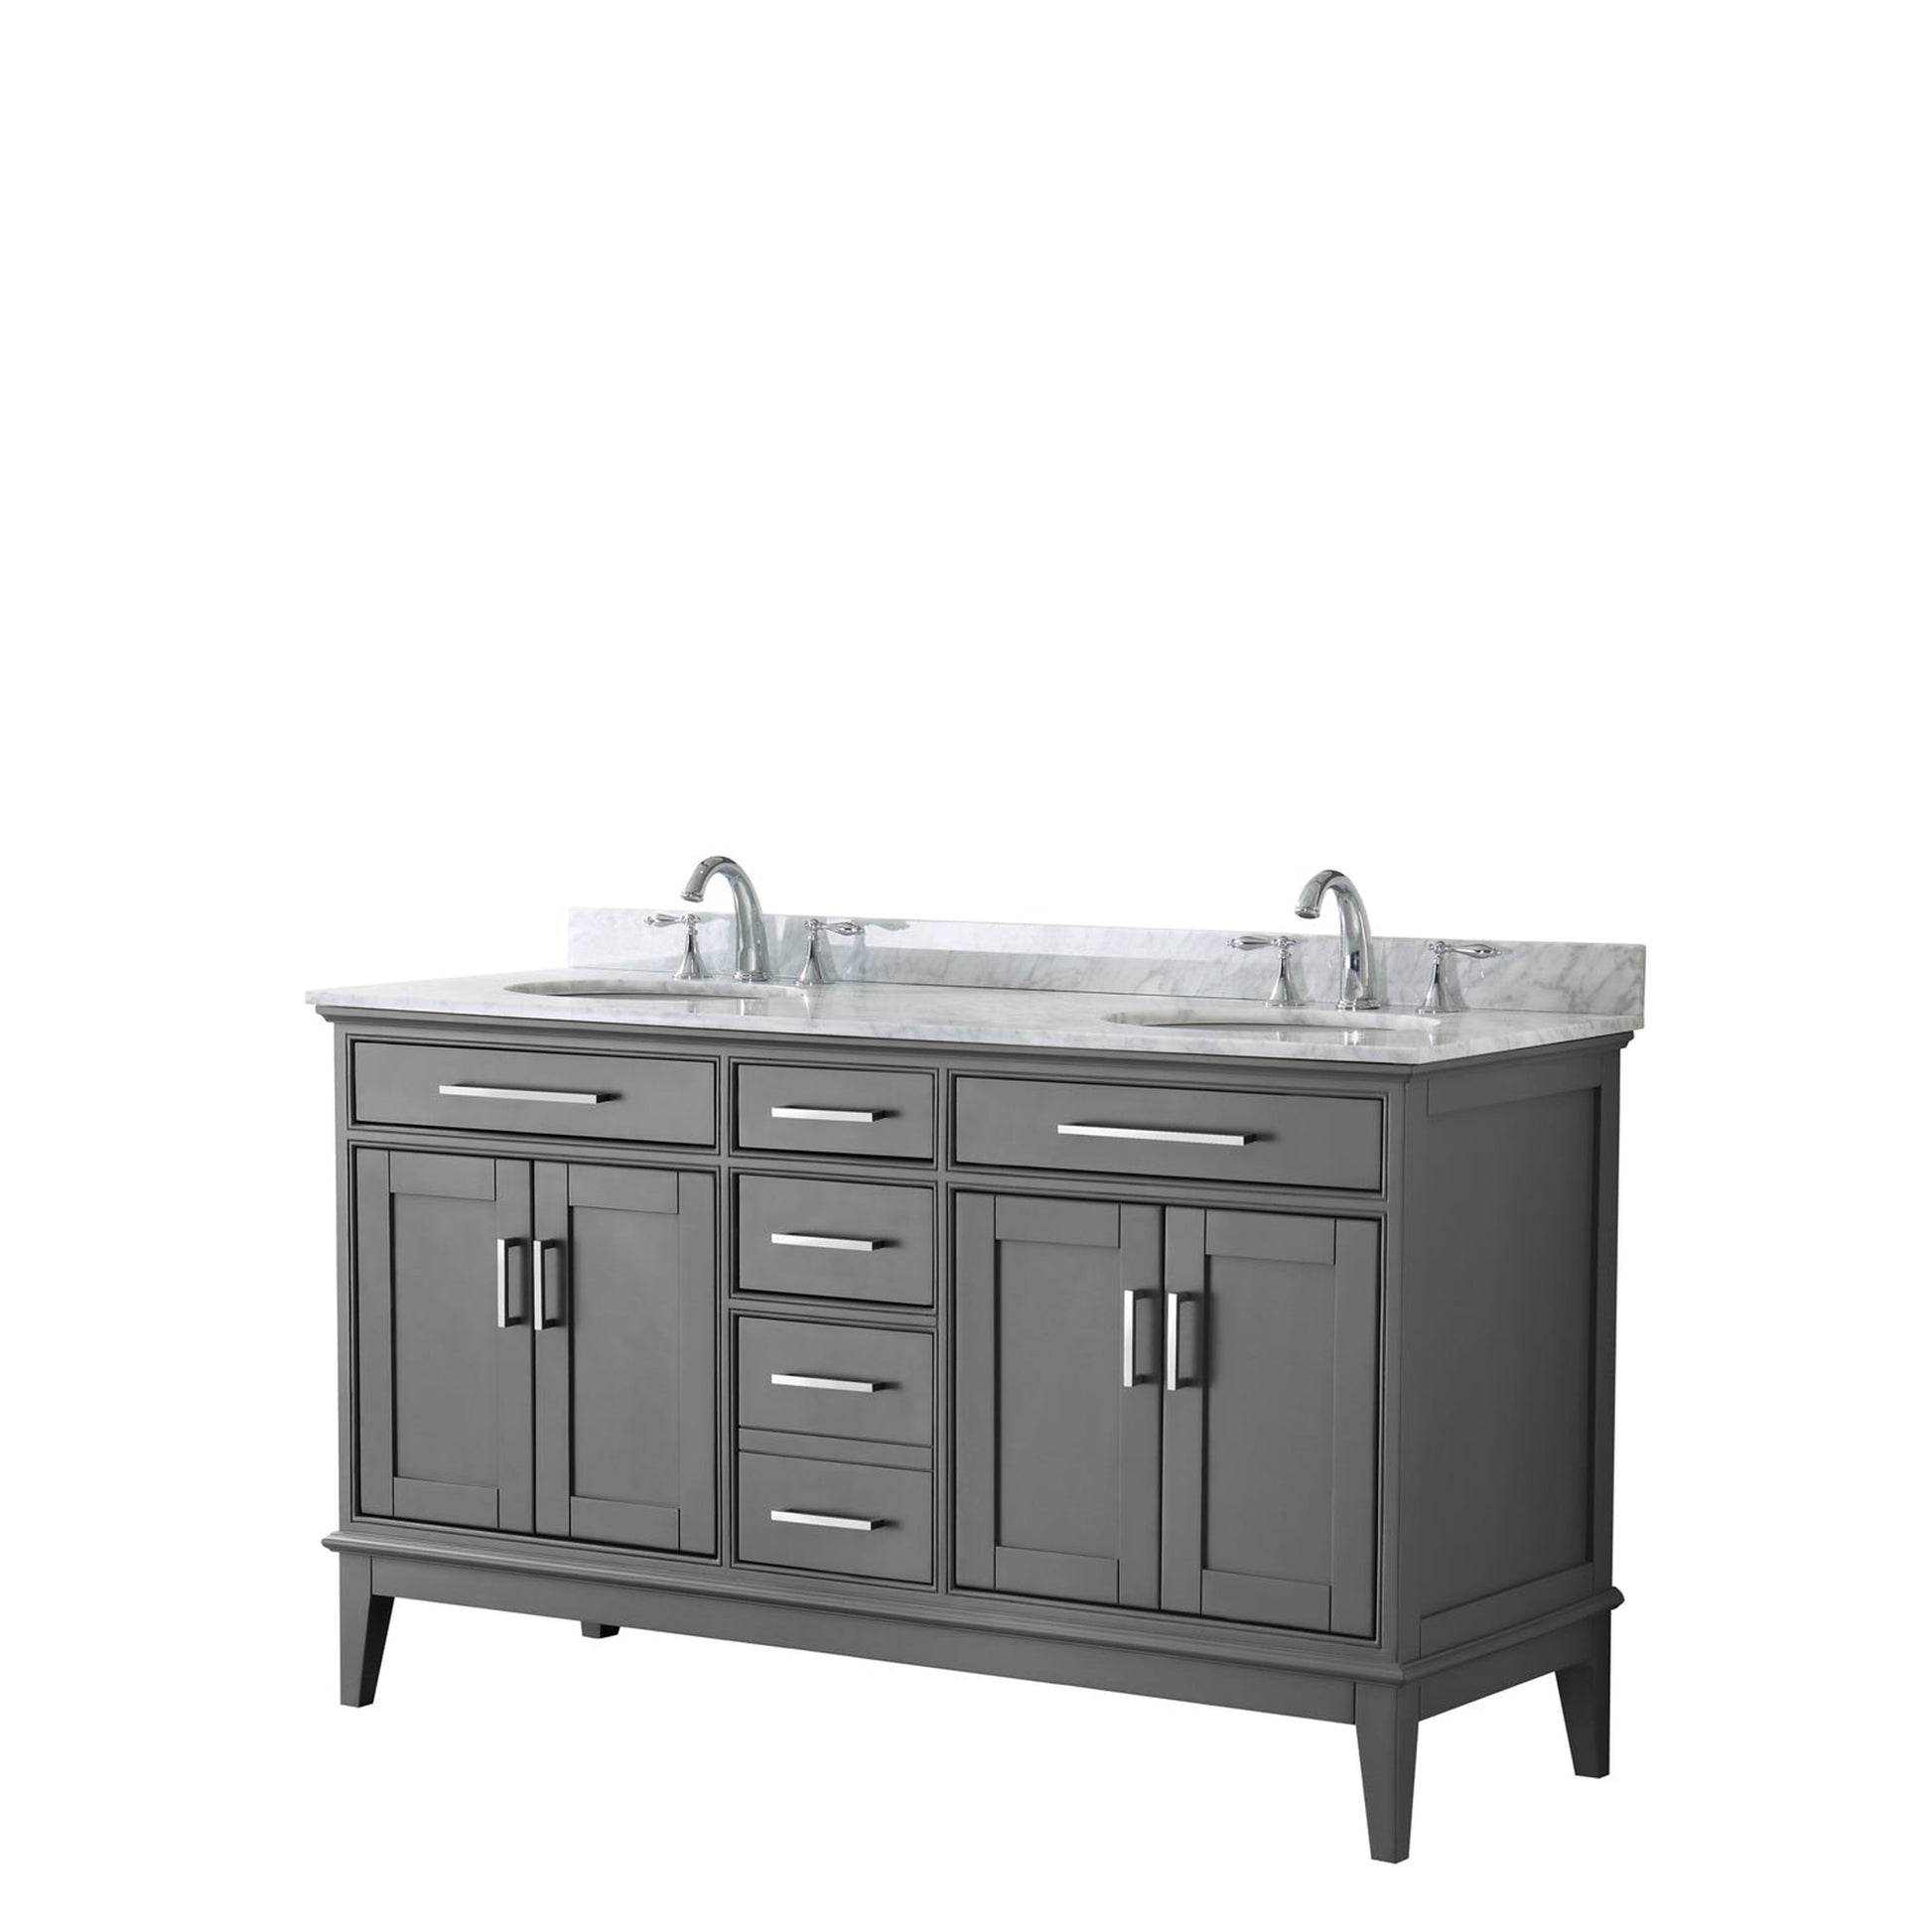 Wyndham Collection Margate 60" Double Bathroom Dark Gray Vanity With White Carrara Marble Countertop And Undermount Oval Sink